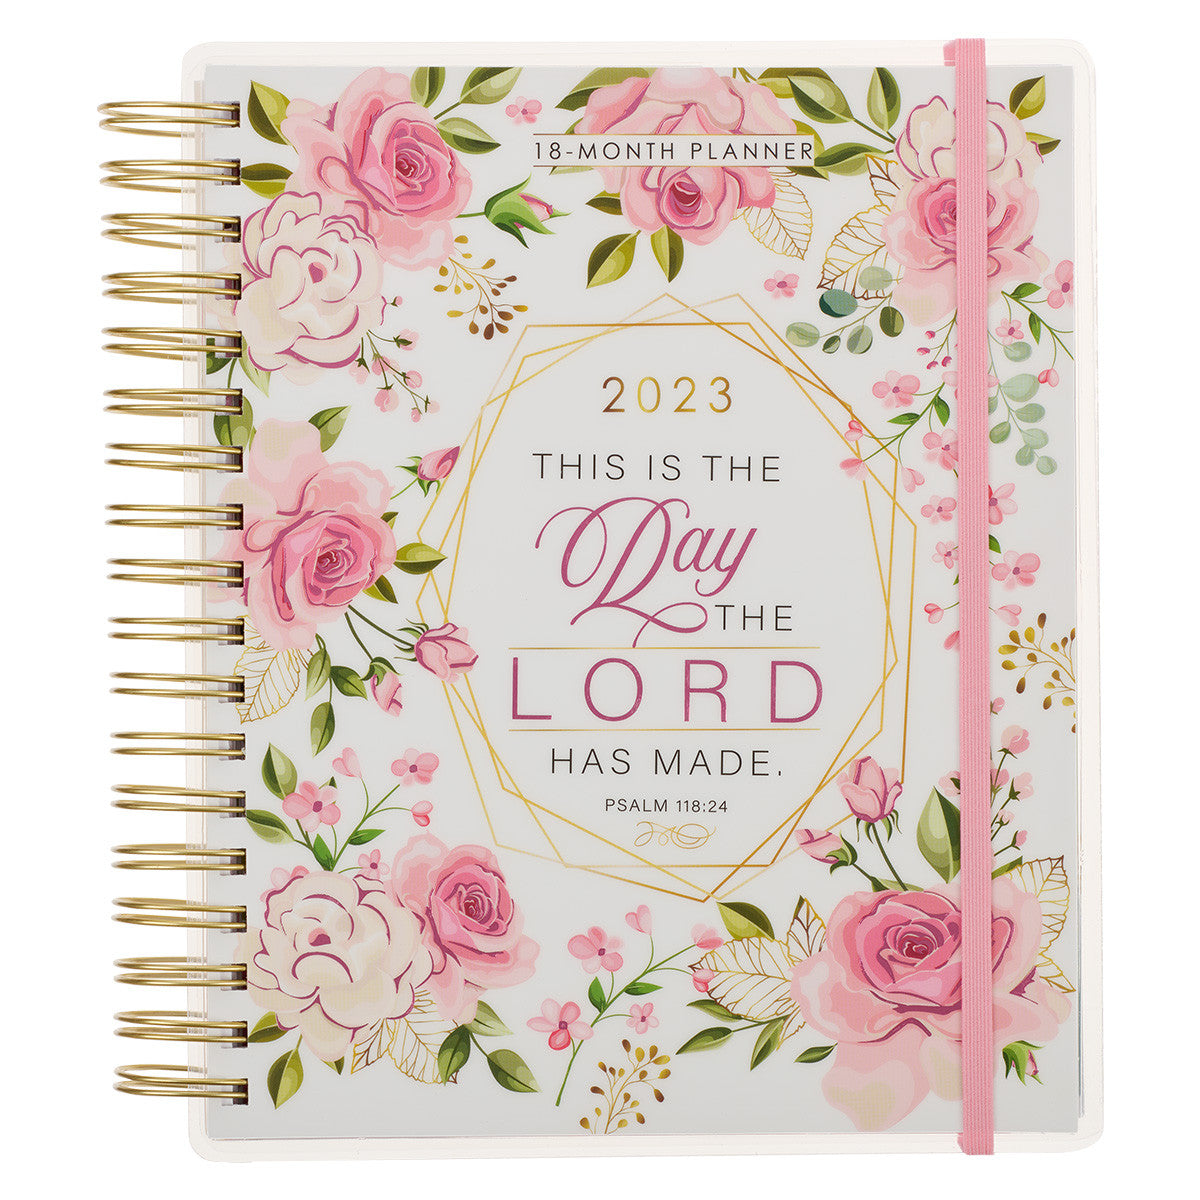 2023 18 Month Planner This is the Day The Lord Has Made